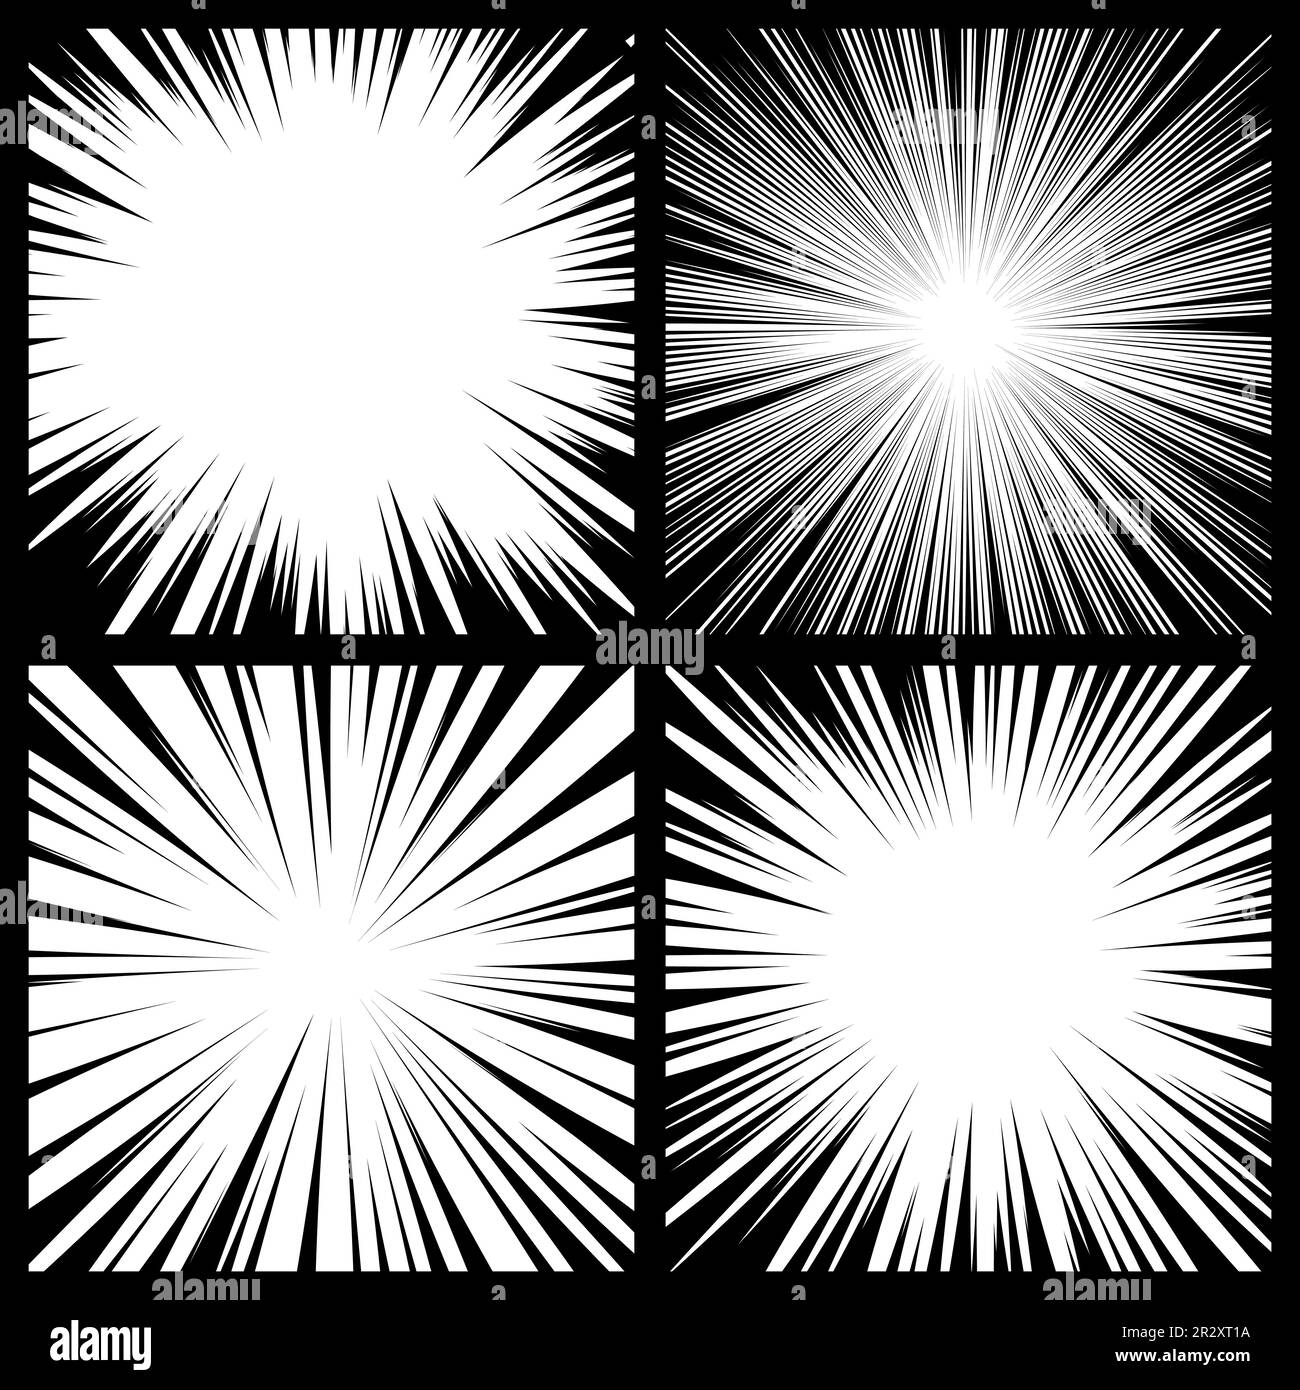 Manga Speed Lines Vector Grunge Ray Illustration Black And White Space For  Text Comic Book Radial